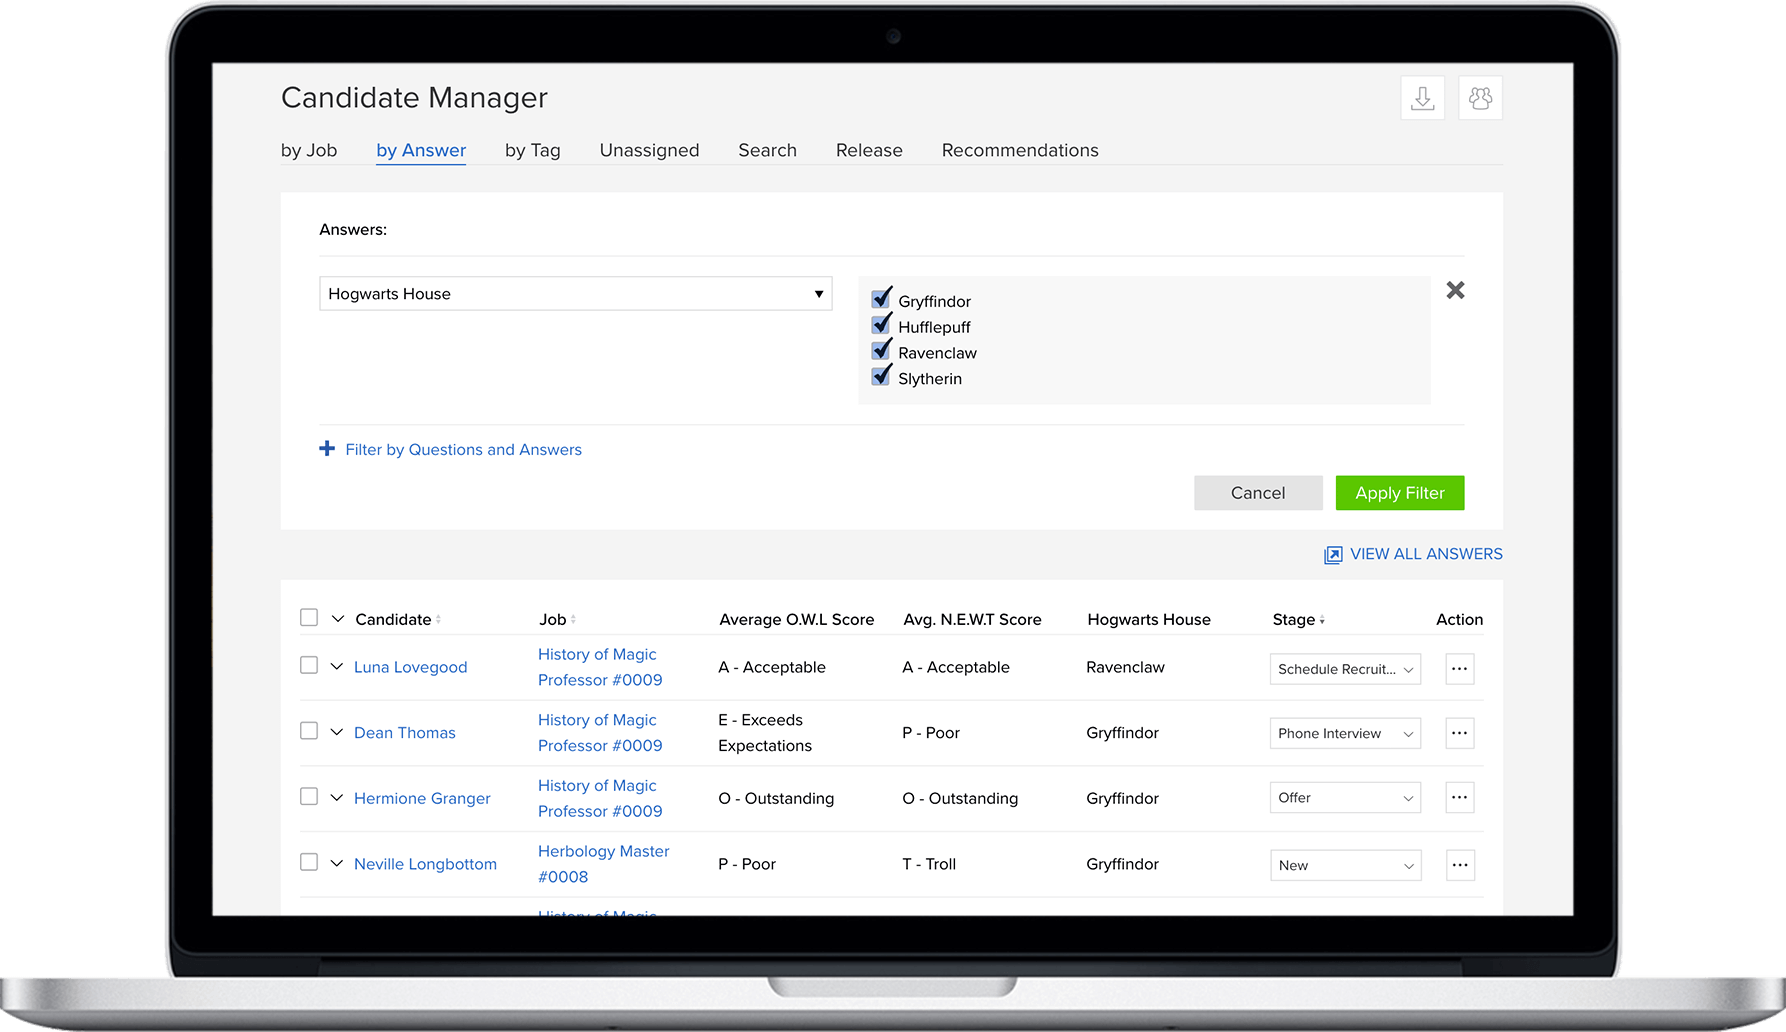 JobScore candidate manager dashboard to hire better